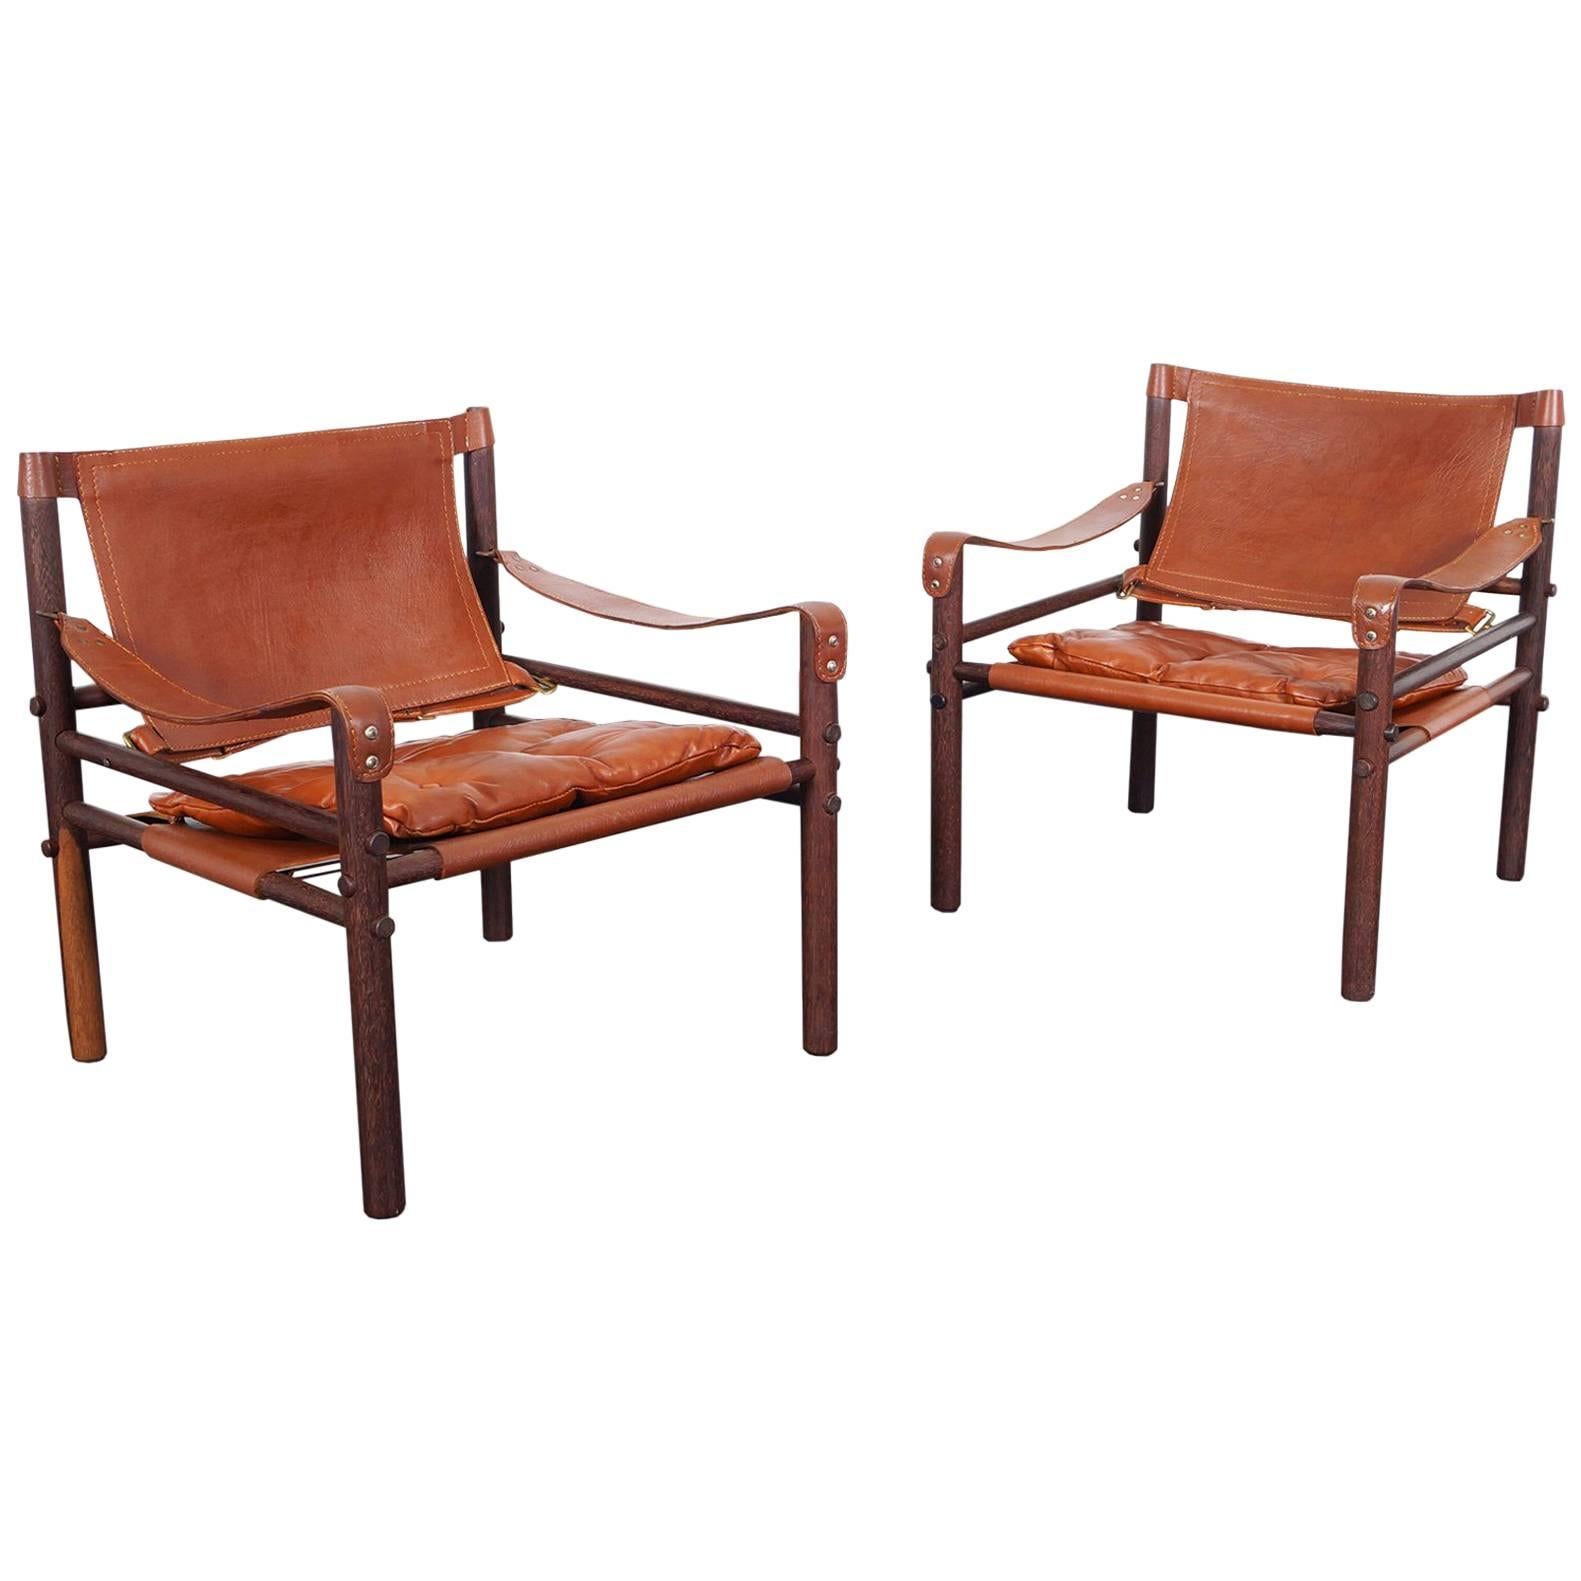 Rosewood "Sirocco" Leather Lounge Chairs by Arne Norell